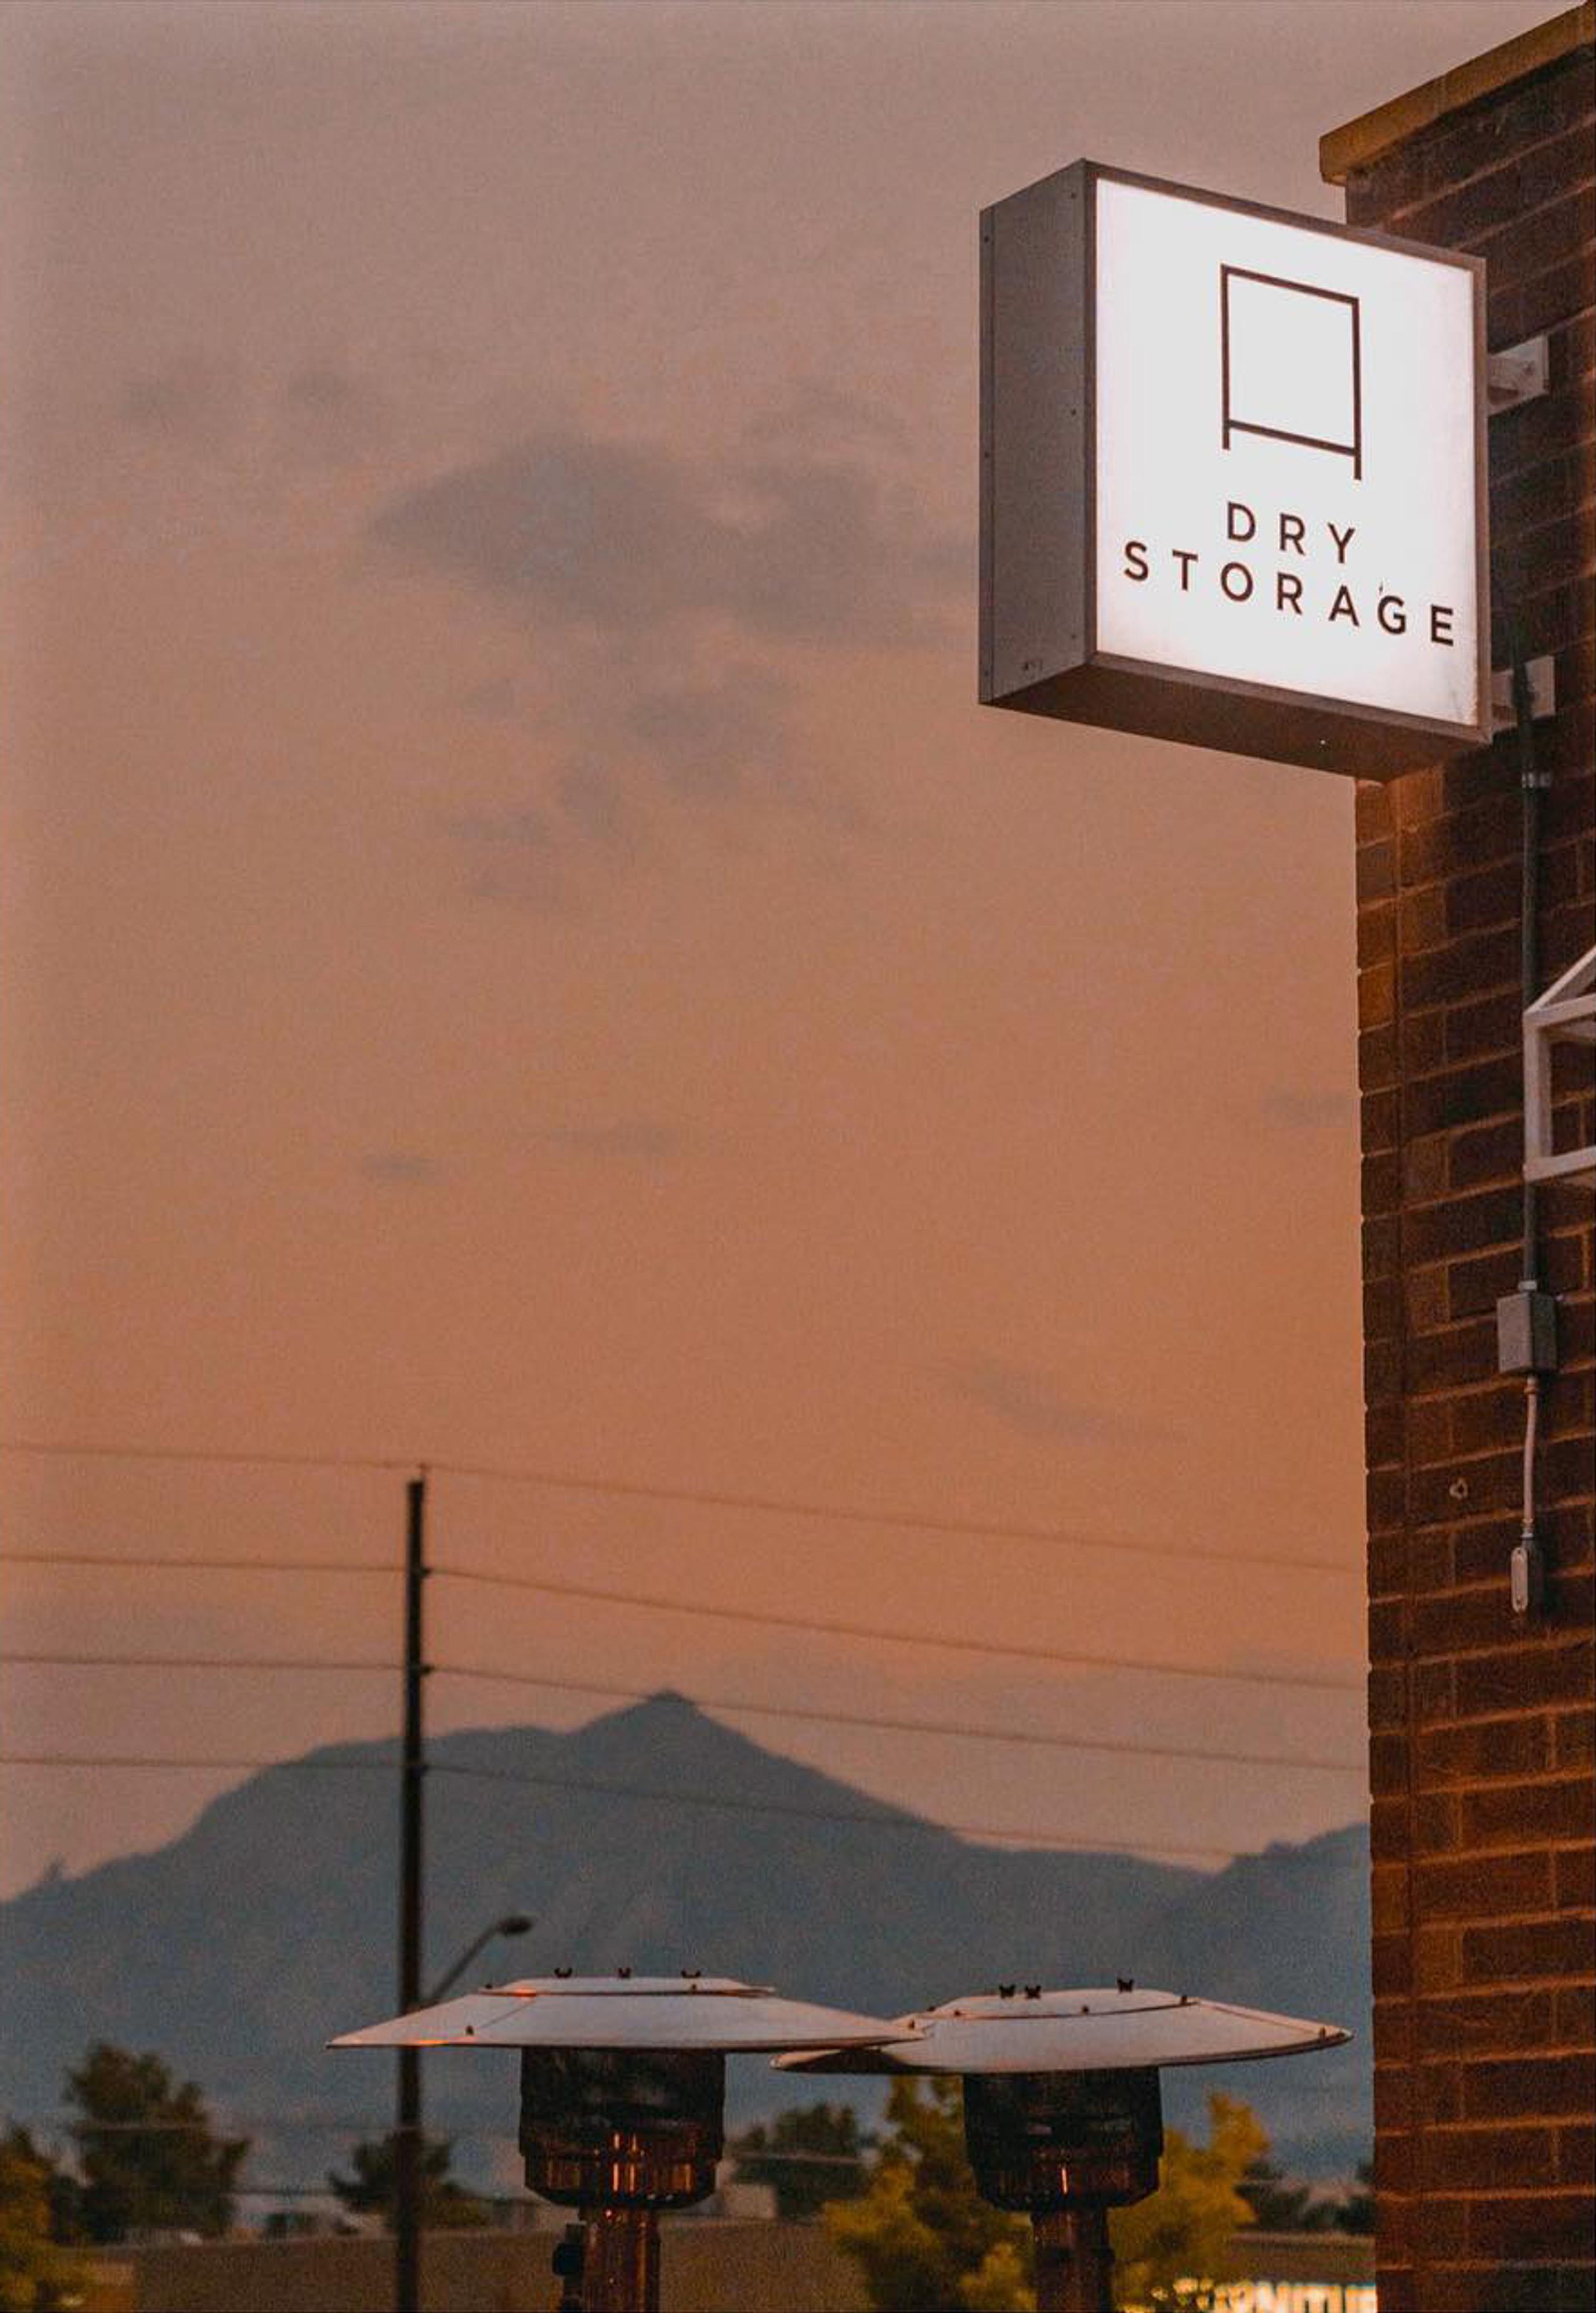 Exterior sign for Dry Storage cafe with sunset and mountains in background